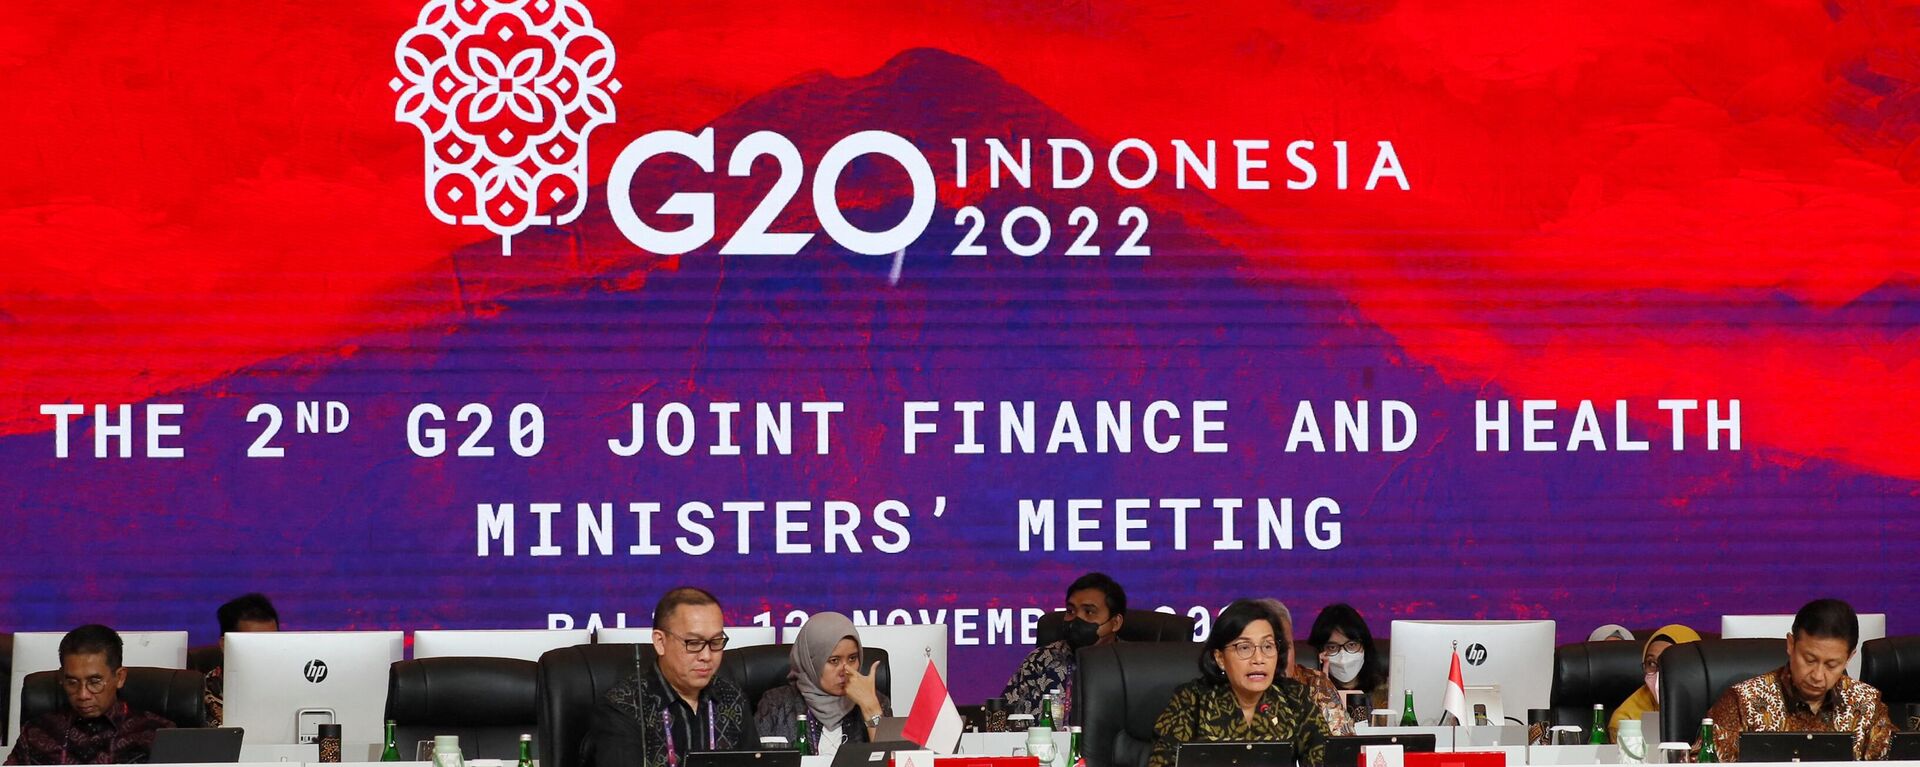 Indonesia's Finance Minister Sri Mulyani Indrawati (2nd-R) delivers a speech during the G20 Finance and Health Ministers meeting in Nusa Dua, Bali 12 November 2022. (Photo by ADE NAGI / POOL / AFP) - Sputnik International, 1920, 14.11.2022